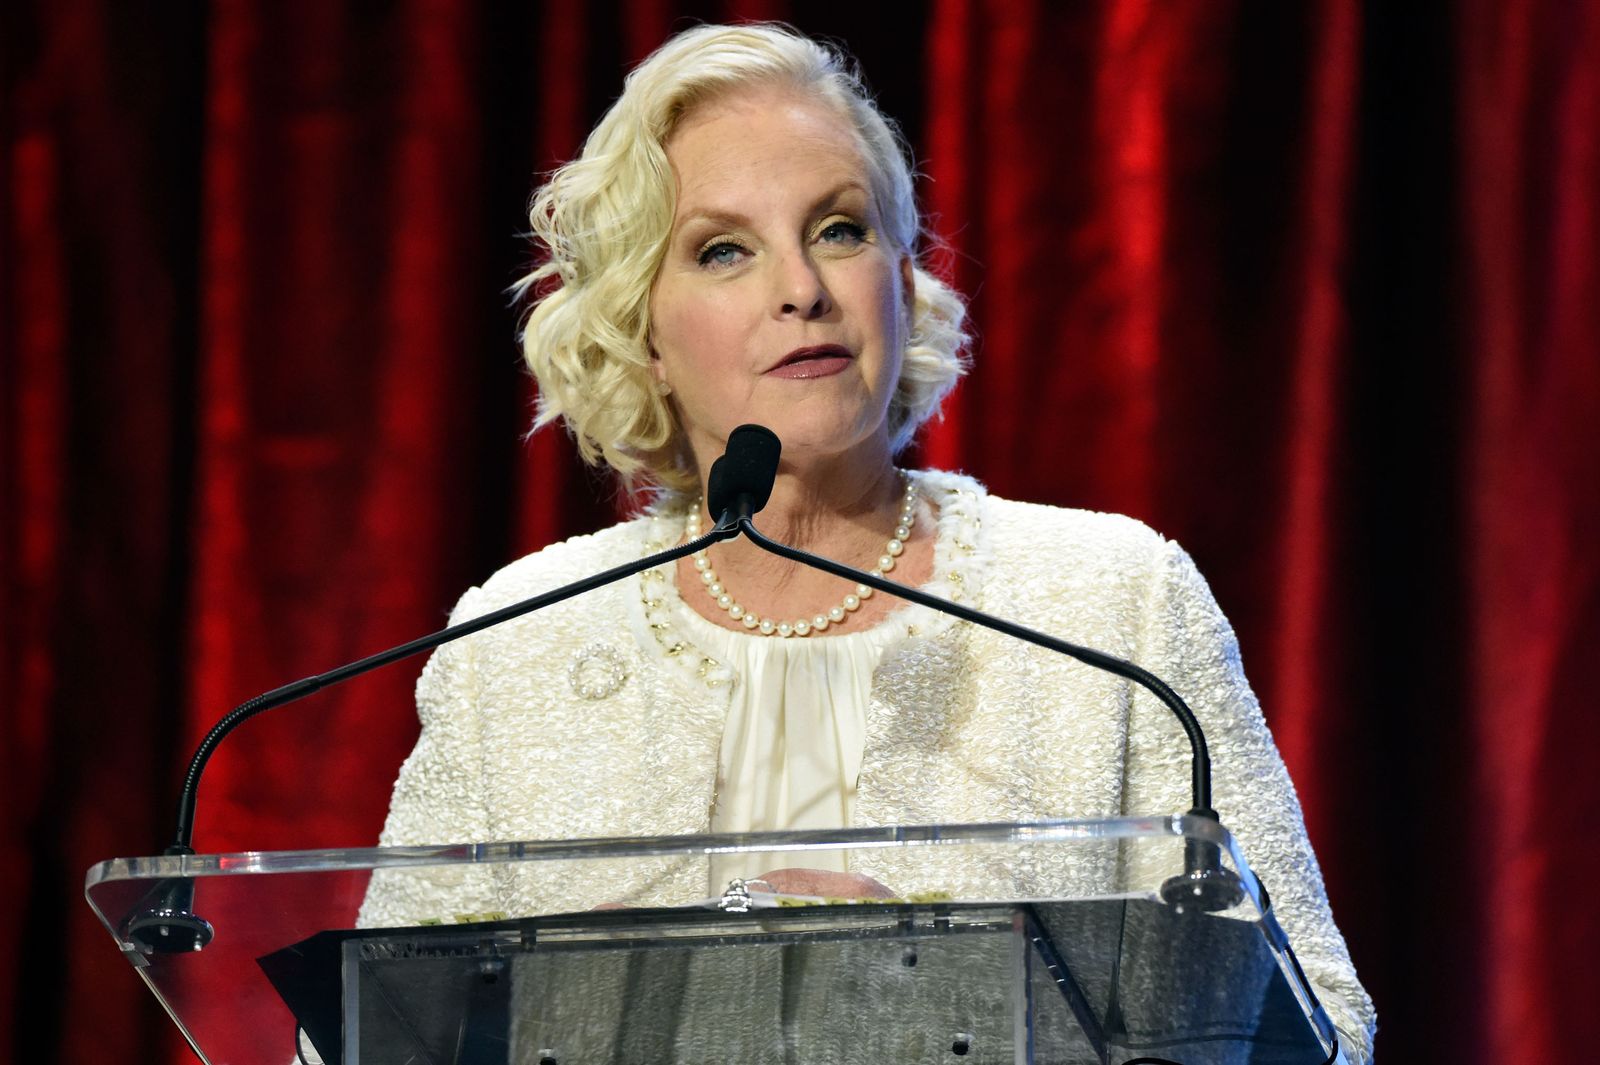 Cindy McCain at Marriott Louisville Downtown on September 17, 2016. | Photo: Getty Images